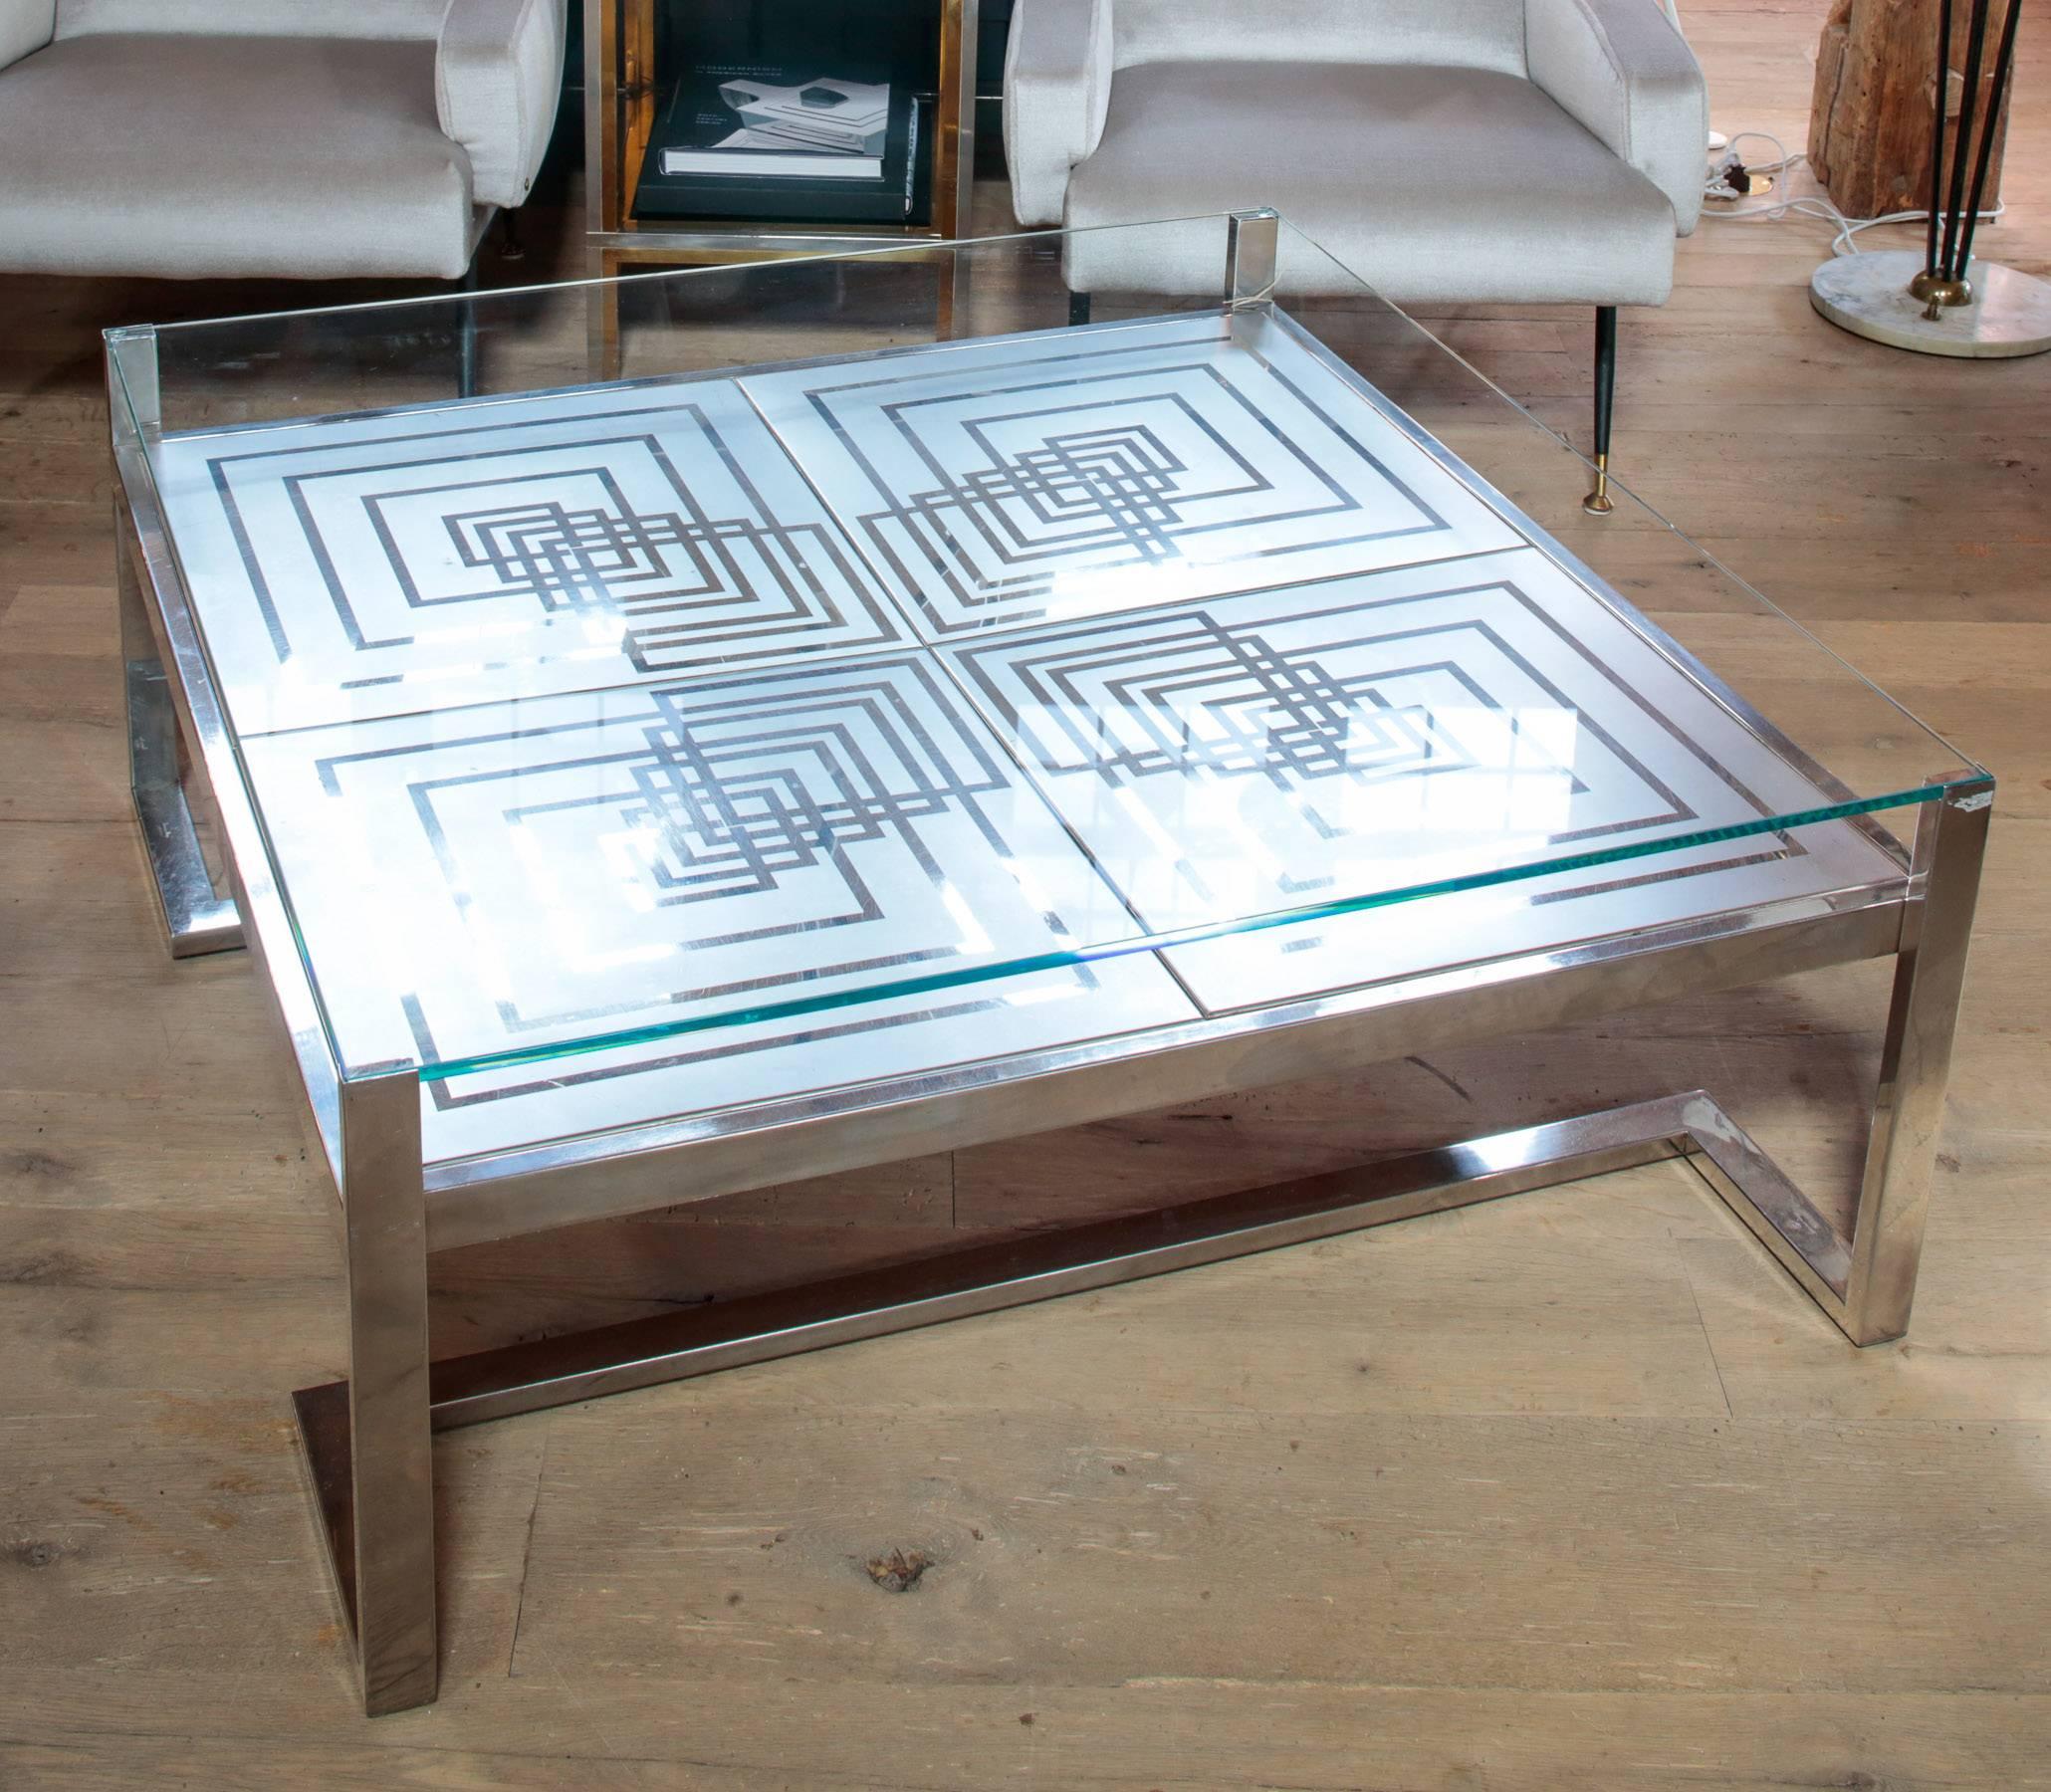 Beautiful 1970s Romeo Rega coffee table in stainless steel and glass with beautiful etching. Designer's insignia in the corner.